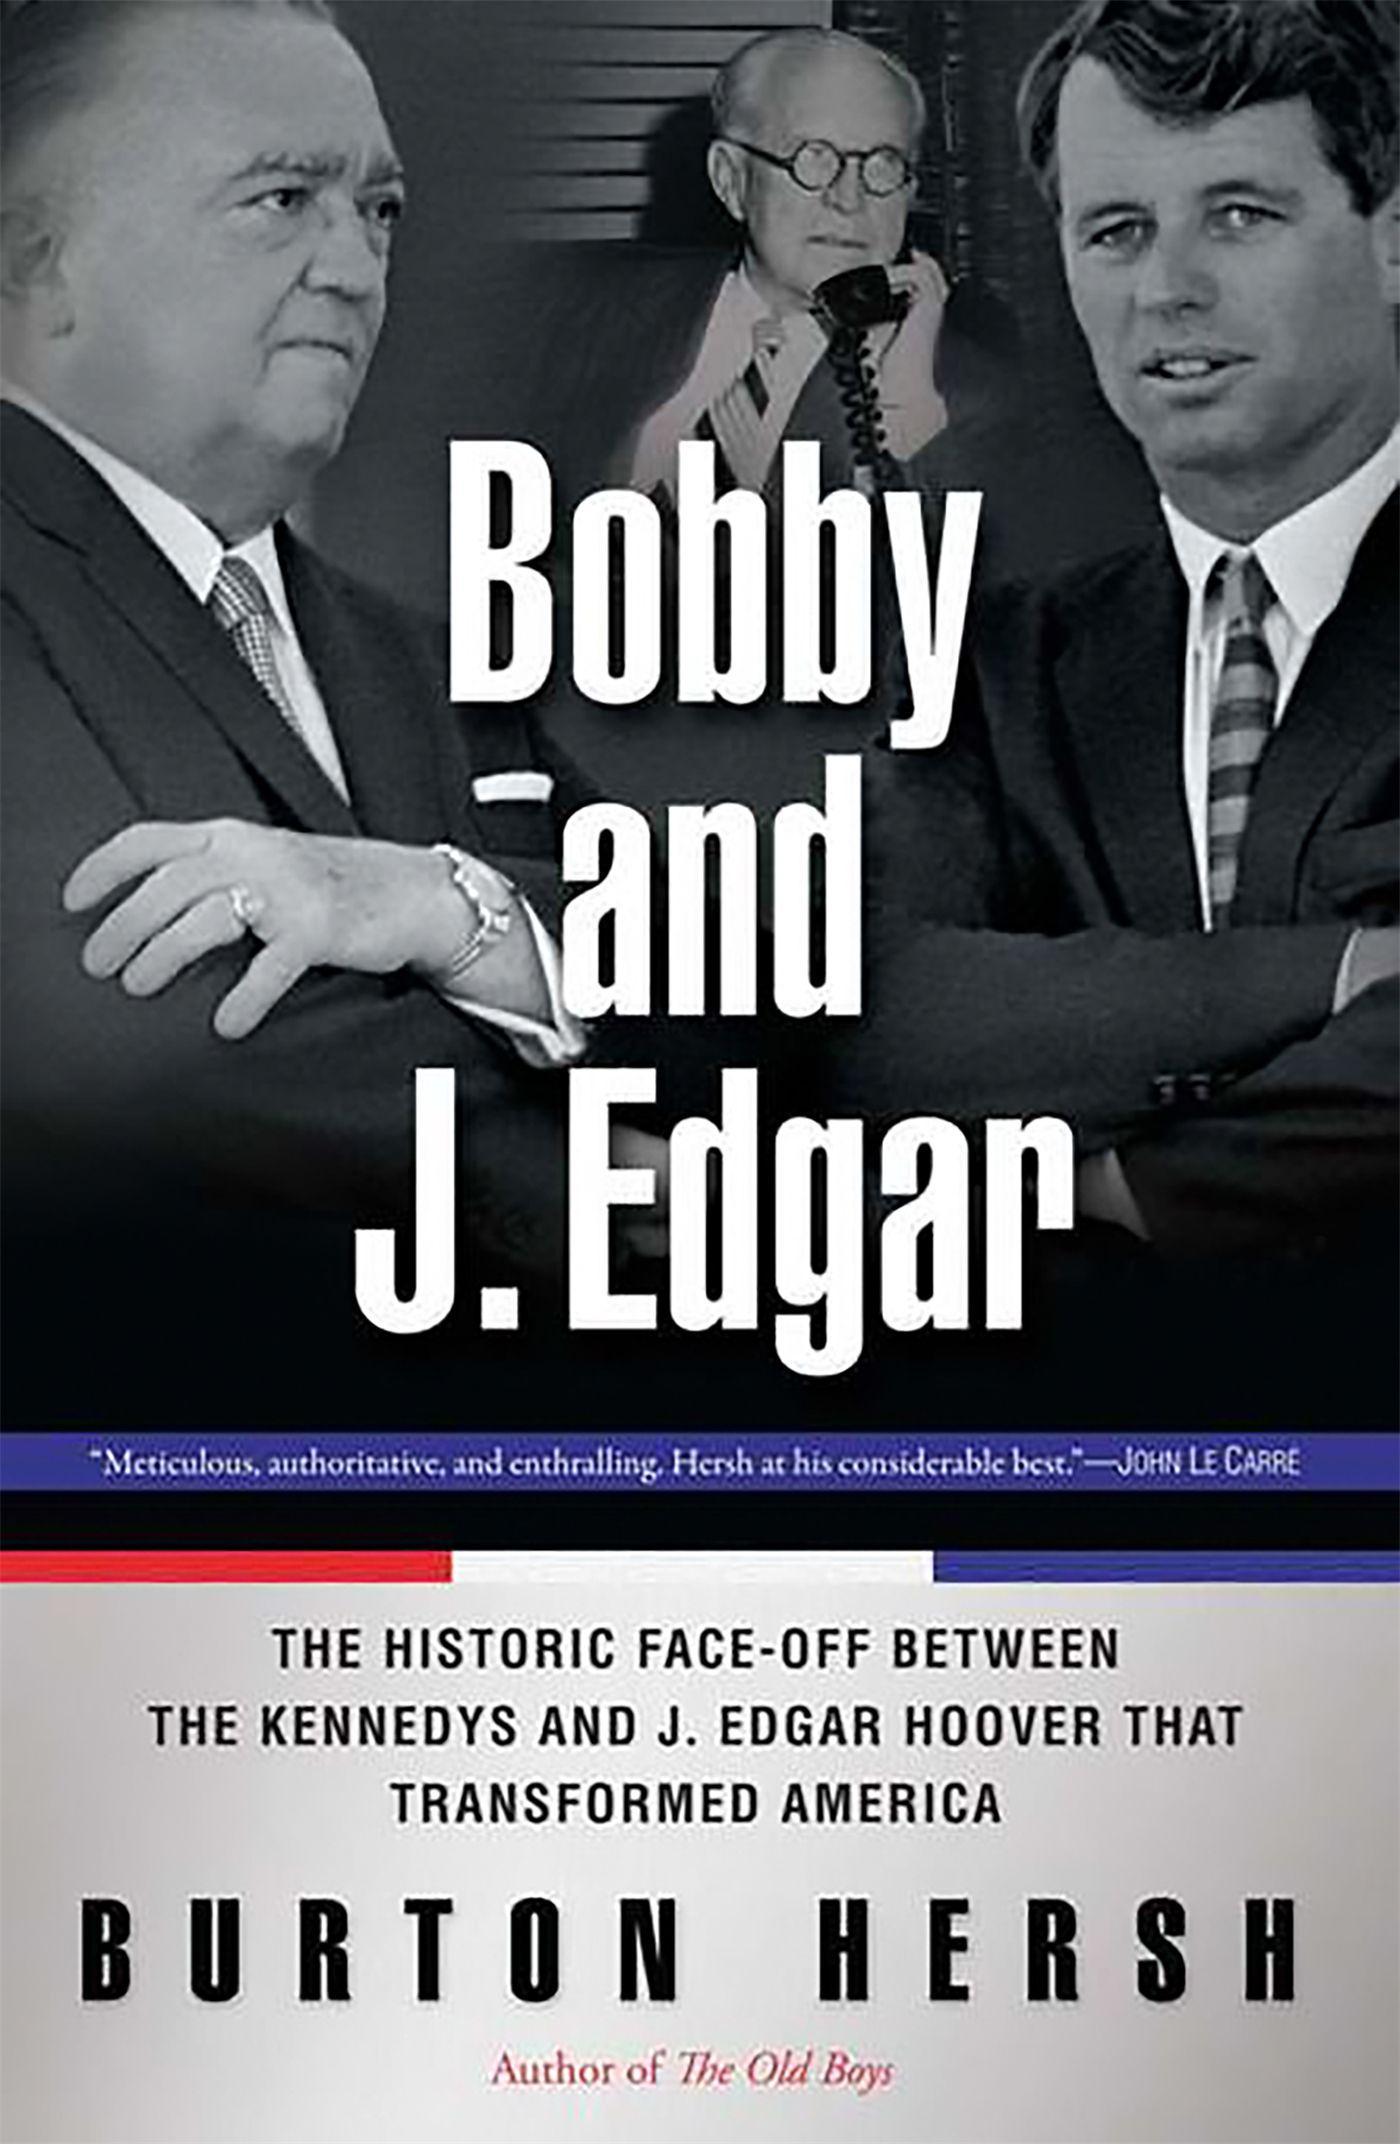 Bobby and J. Edgar Revised Edition: The Historic Face-Off Between the Kennedys and J. Edgar Hoover That Transformed America - Hersh, Burton